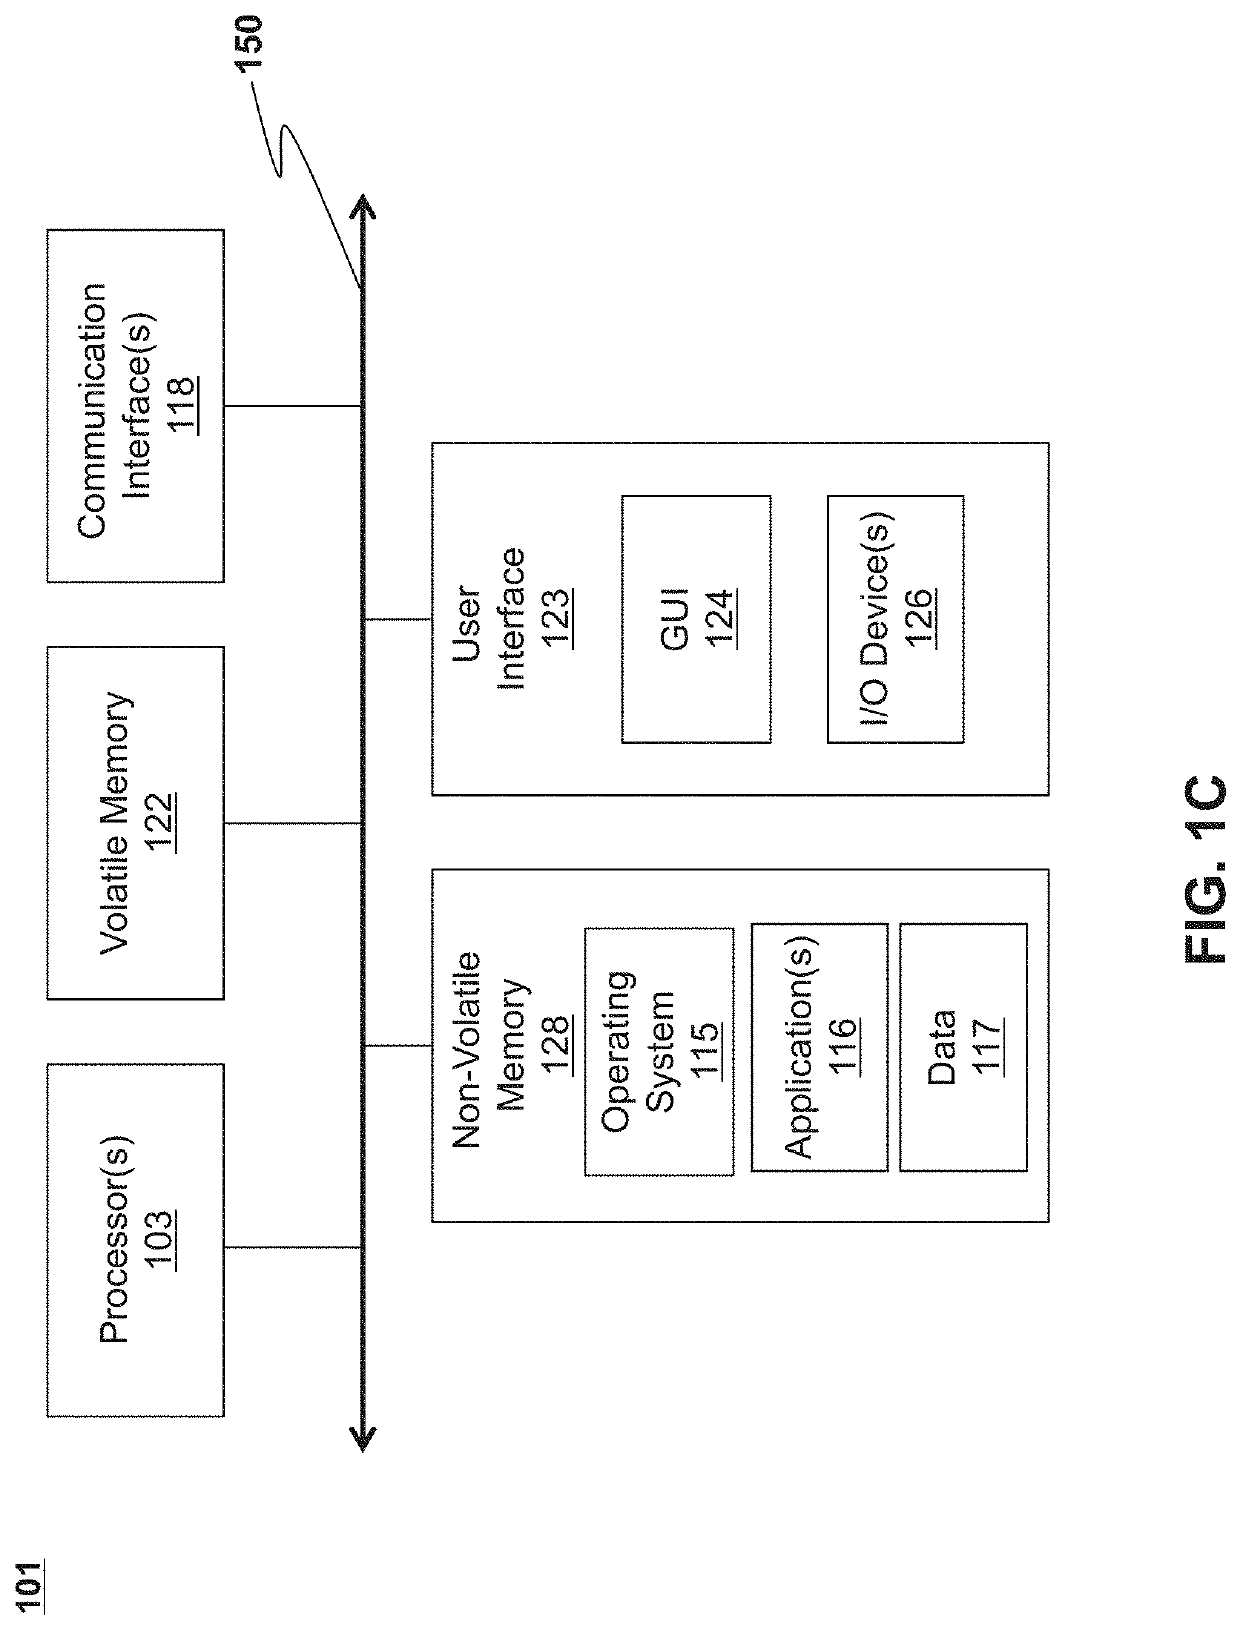 Method for optimal path selection for data traffic undergoing high processing or queuing delay